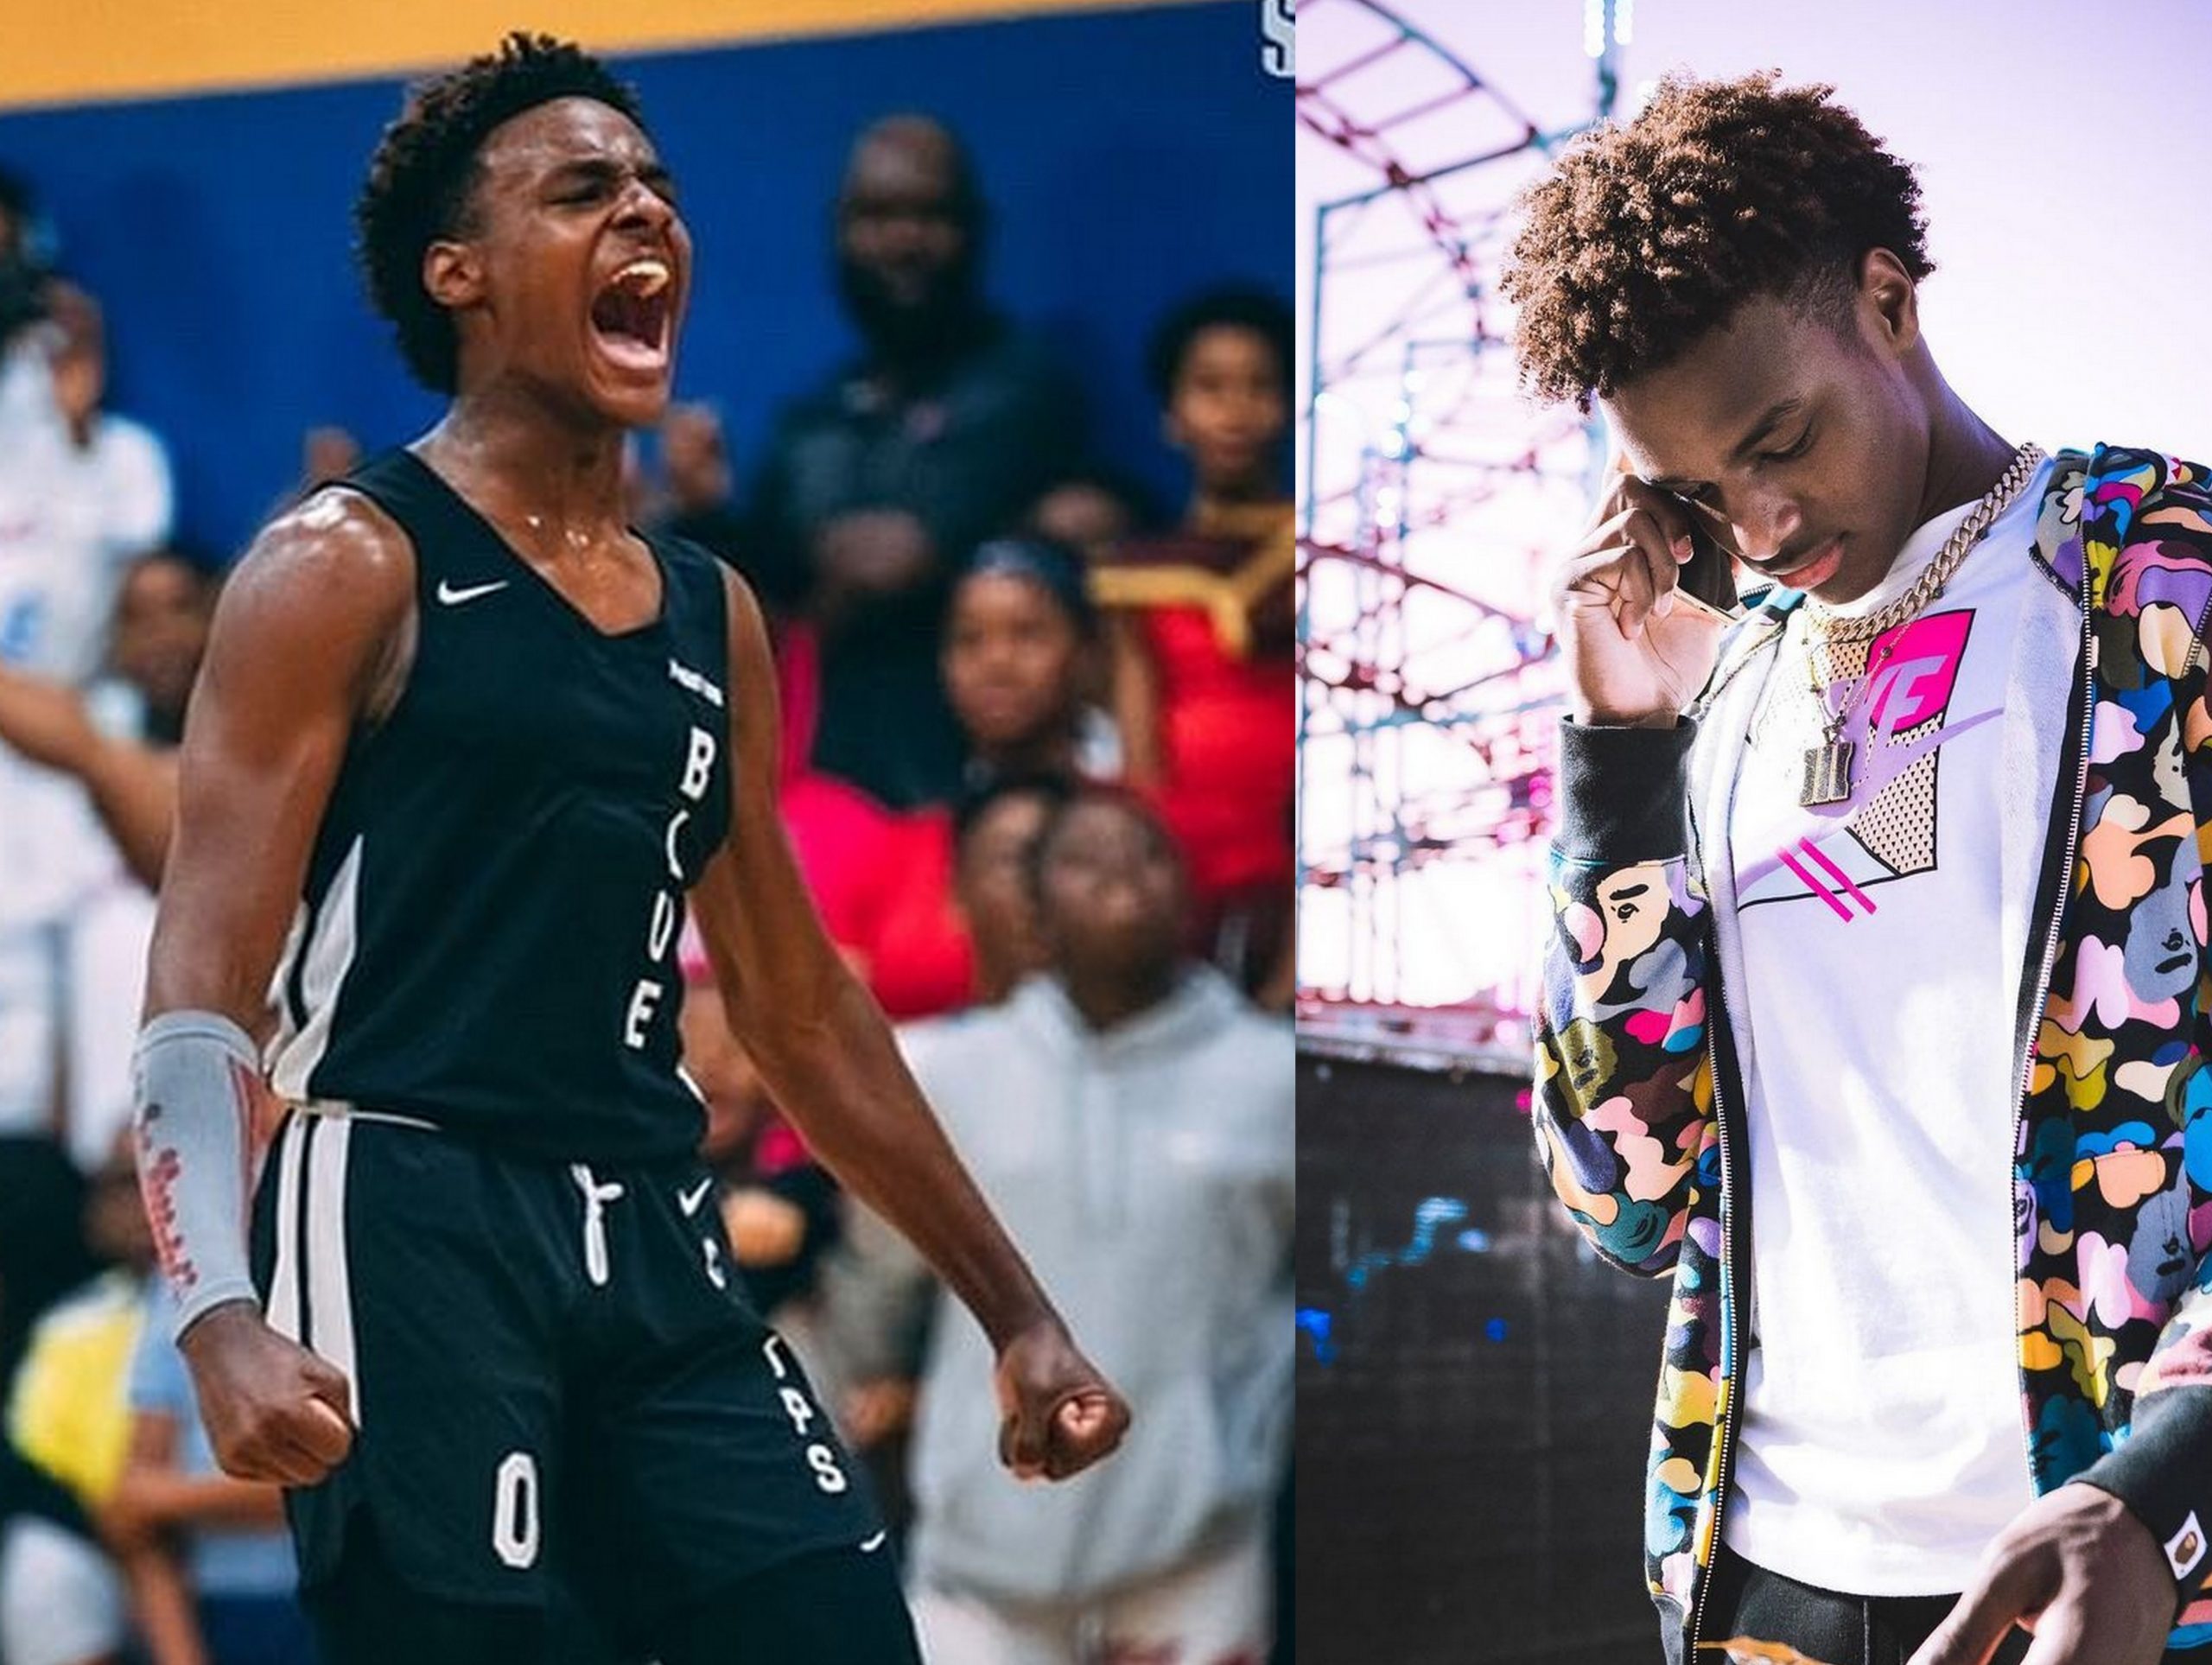 Lehigh Valley boys basketball: LeBron James' son Bronny and DJ Wagner, two  of the best high school players in the nation, will play at PPL Center –  The Morning Call